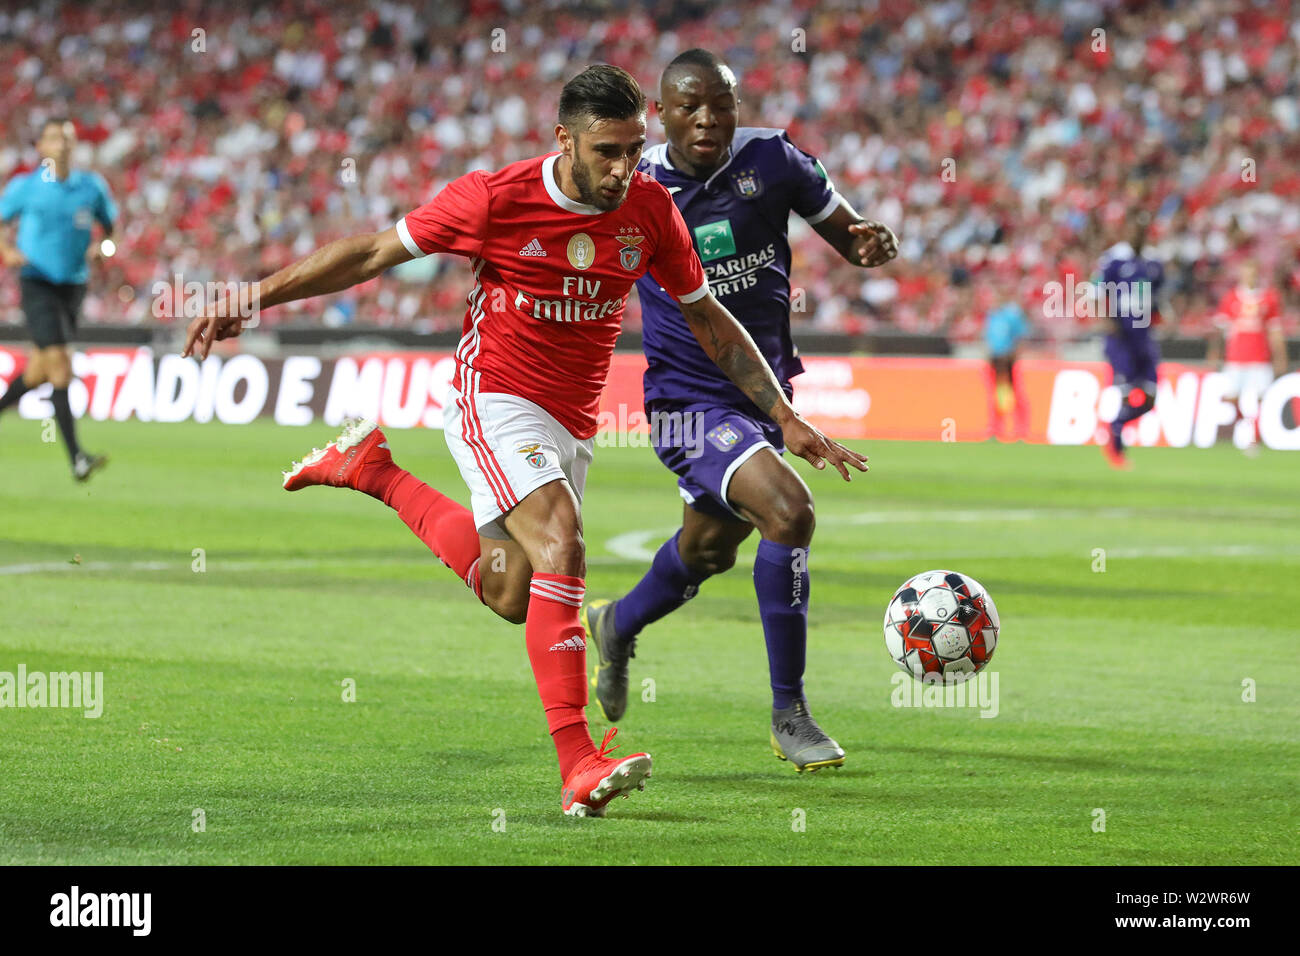 Lisbon, Portugal. 10th July, 2019. Toto Salvio of SL Benfica (L) vies for the ball with Edo Kayembe of Royal Sporting Club Anderlecht (R) during the Pre-Season football match 2019/2020 between SL Benfica vs Royal Sporting Club Anderlecht. (Final score: SL Benfica 1 - 2 Royal Sporting Club Anderlecht) Credit: SOPA Images Limited/Alamy Live News Stock Photo